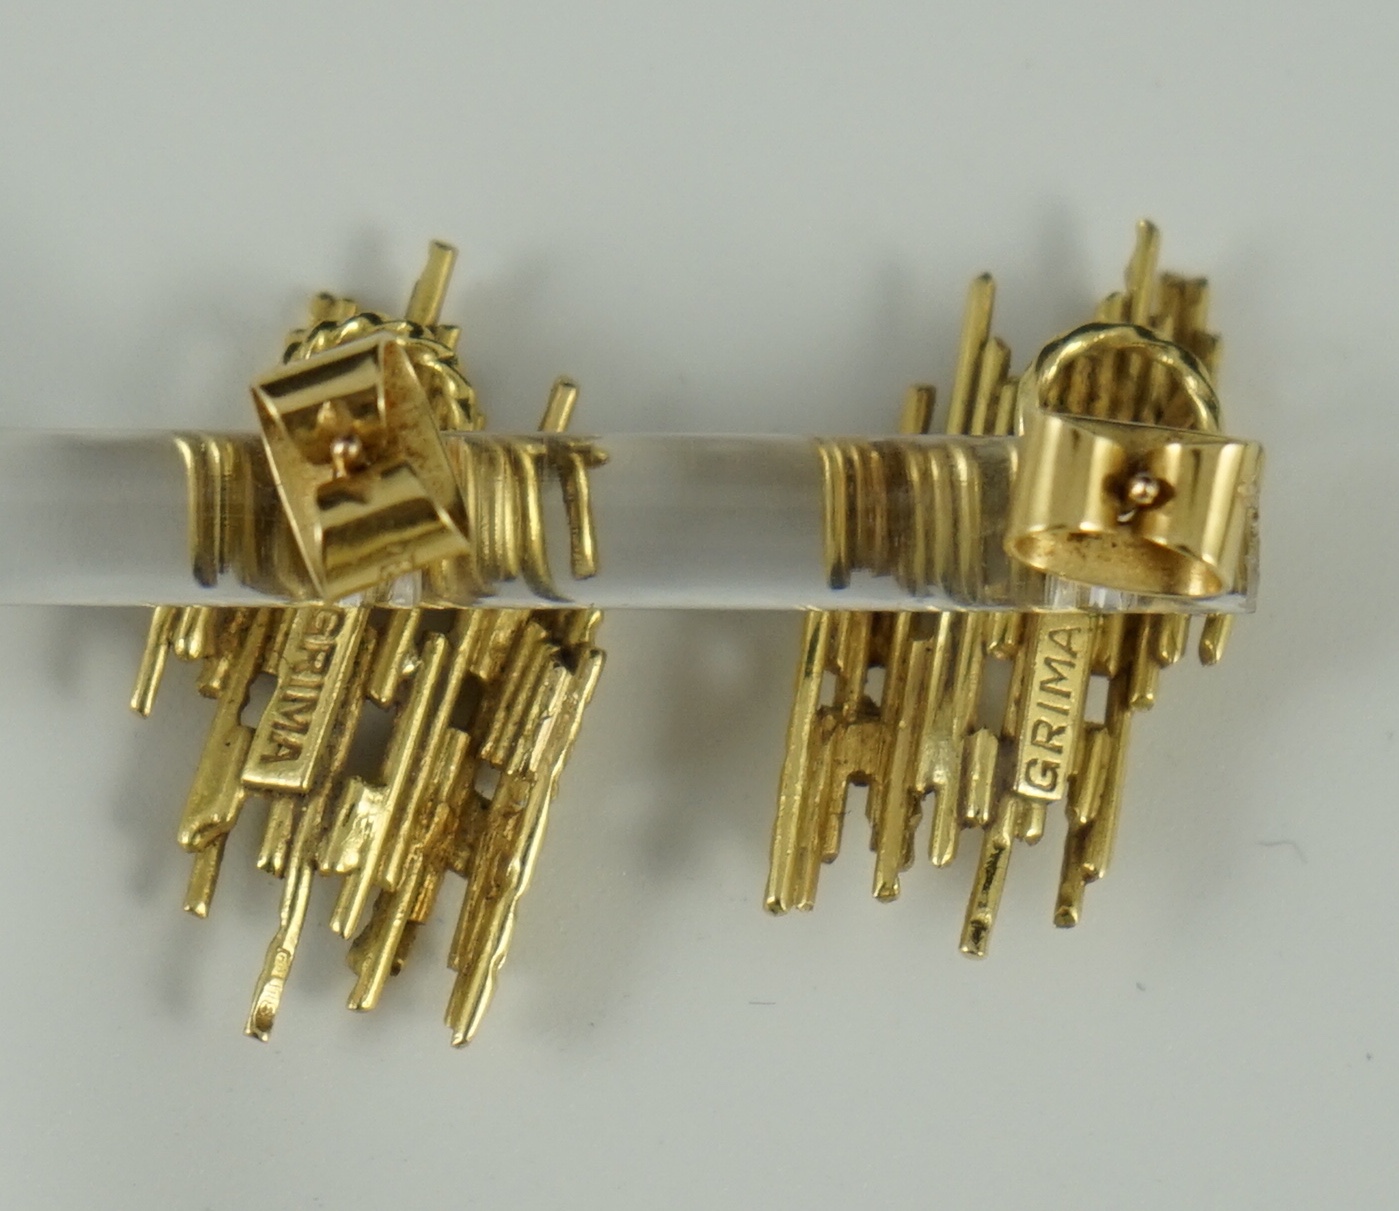 A pair of textured 18ct gold modernist earrings, by Andrew Grima